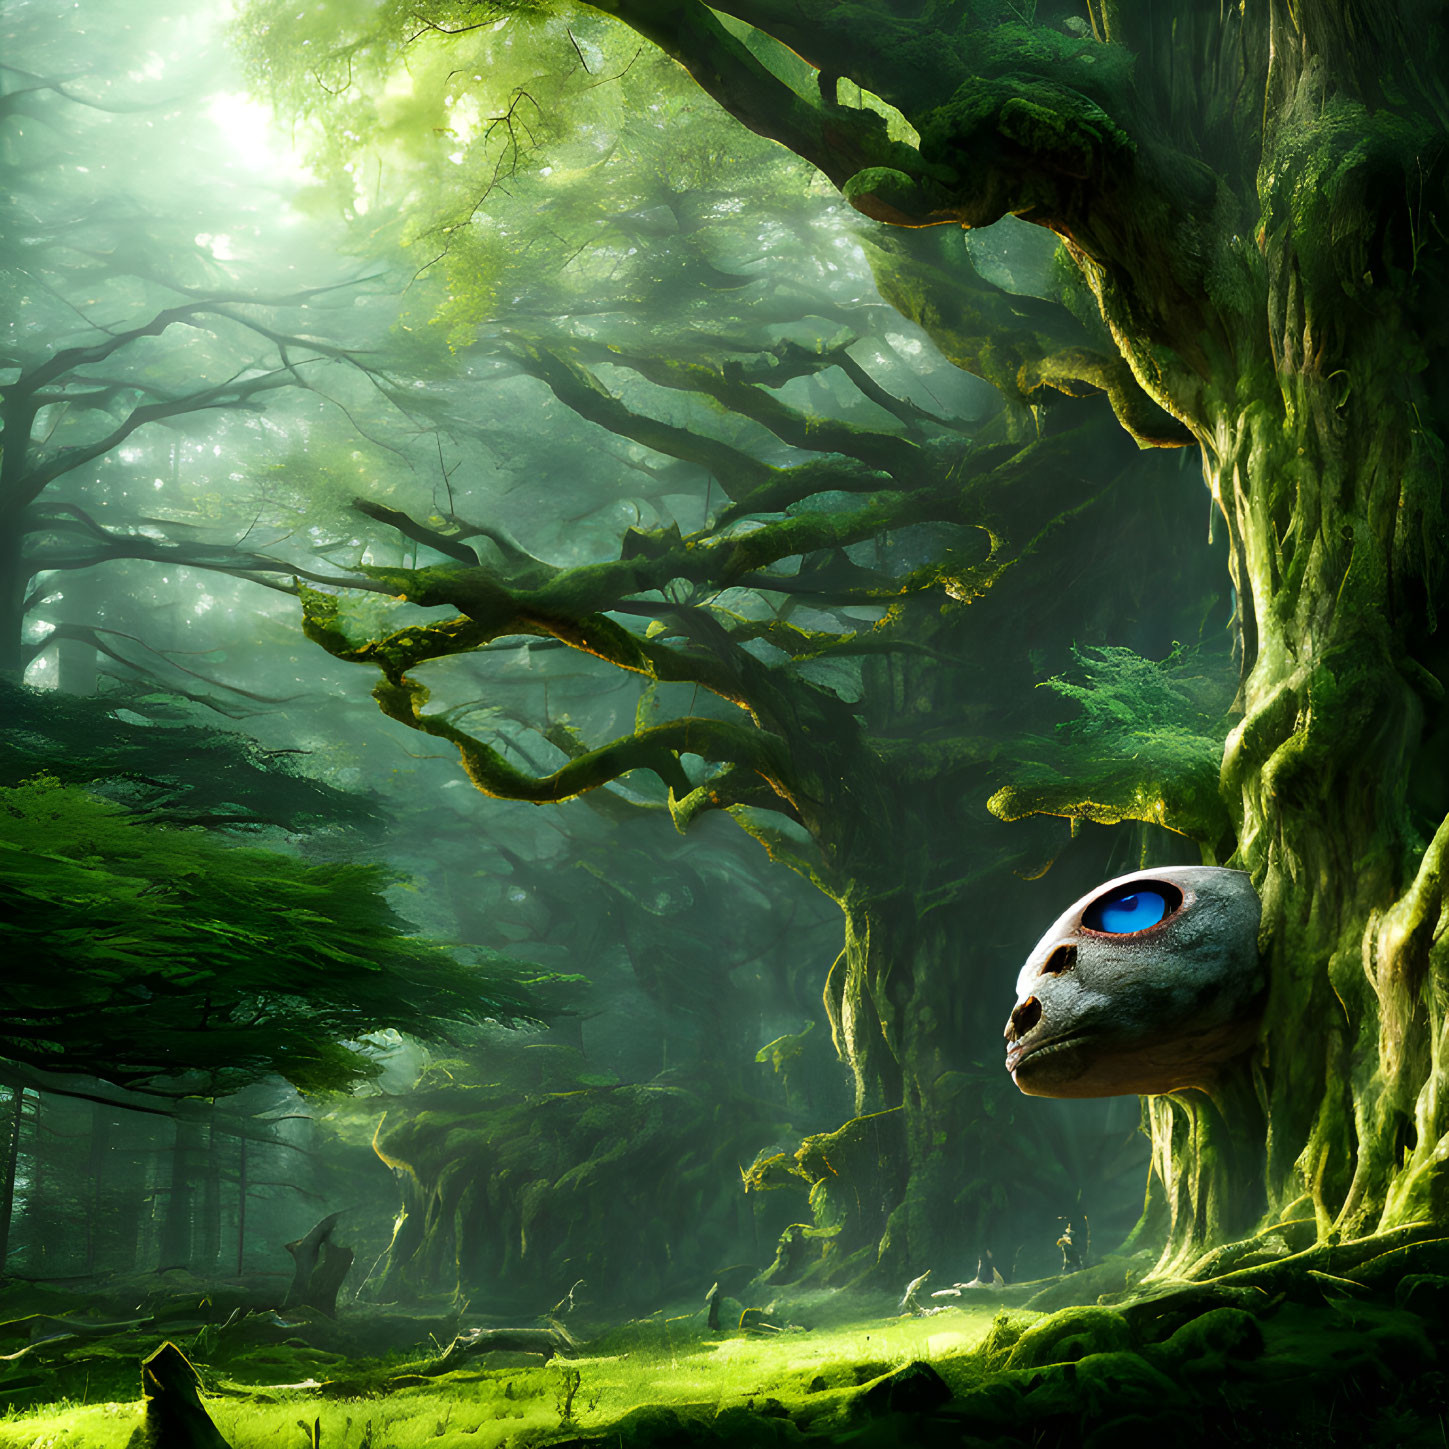 Ethereal forest scene with ancient trees and mystical mask-like object